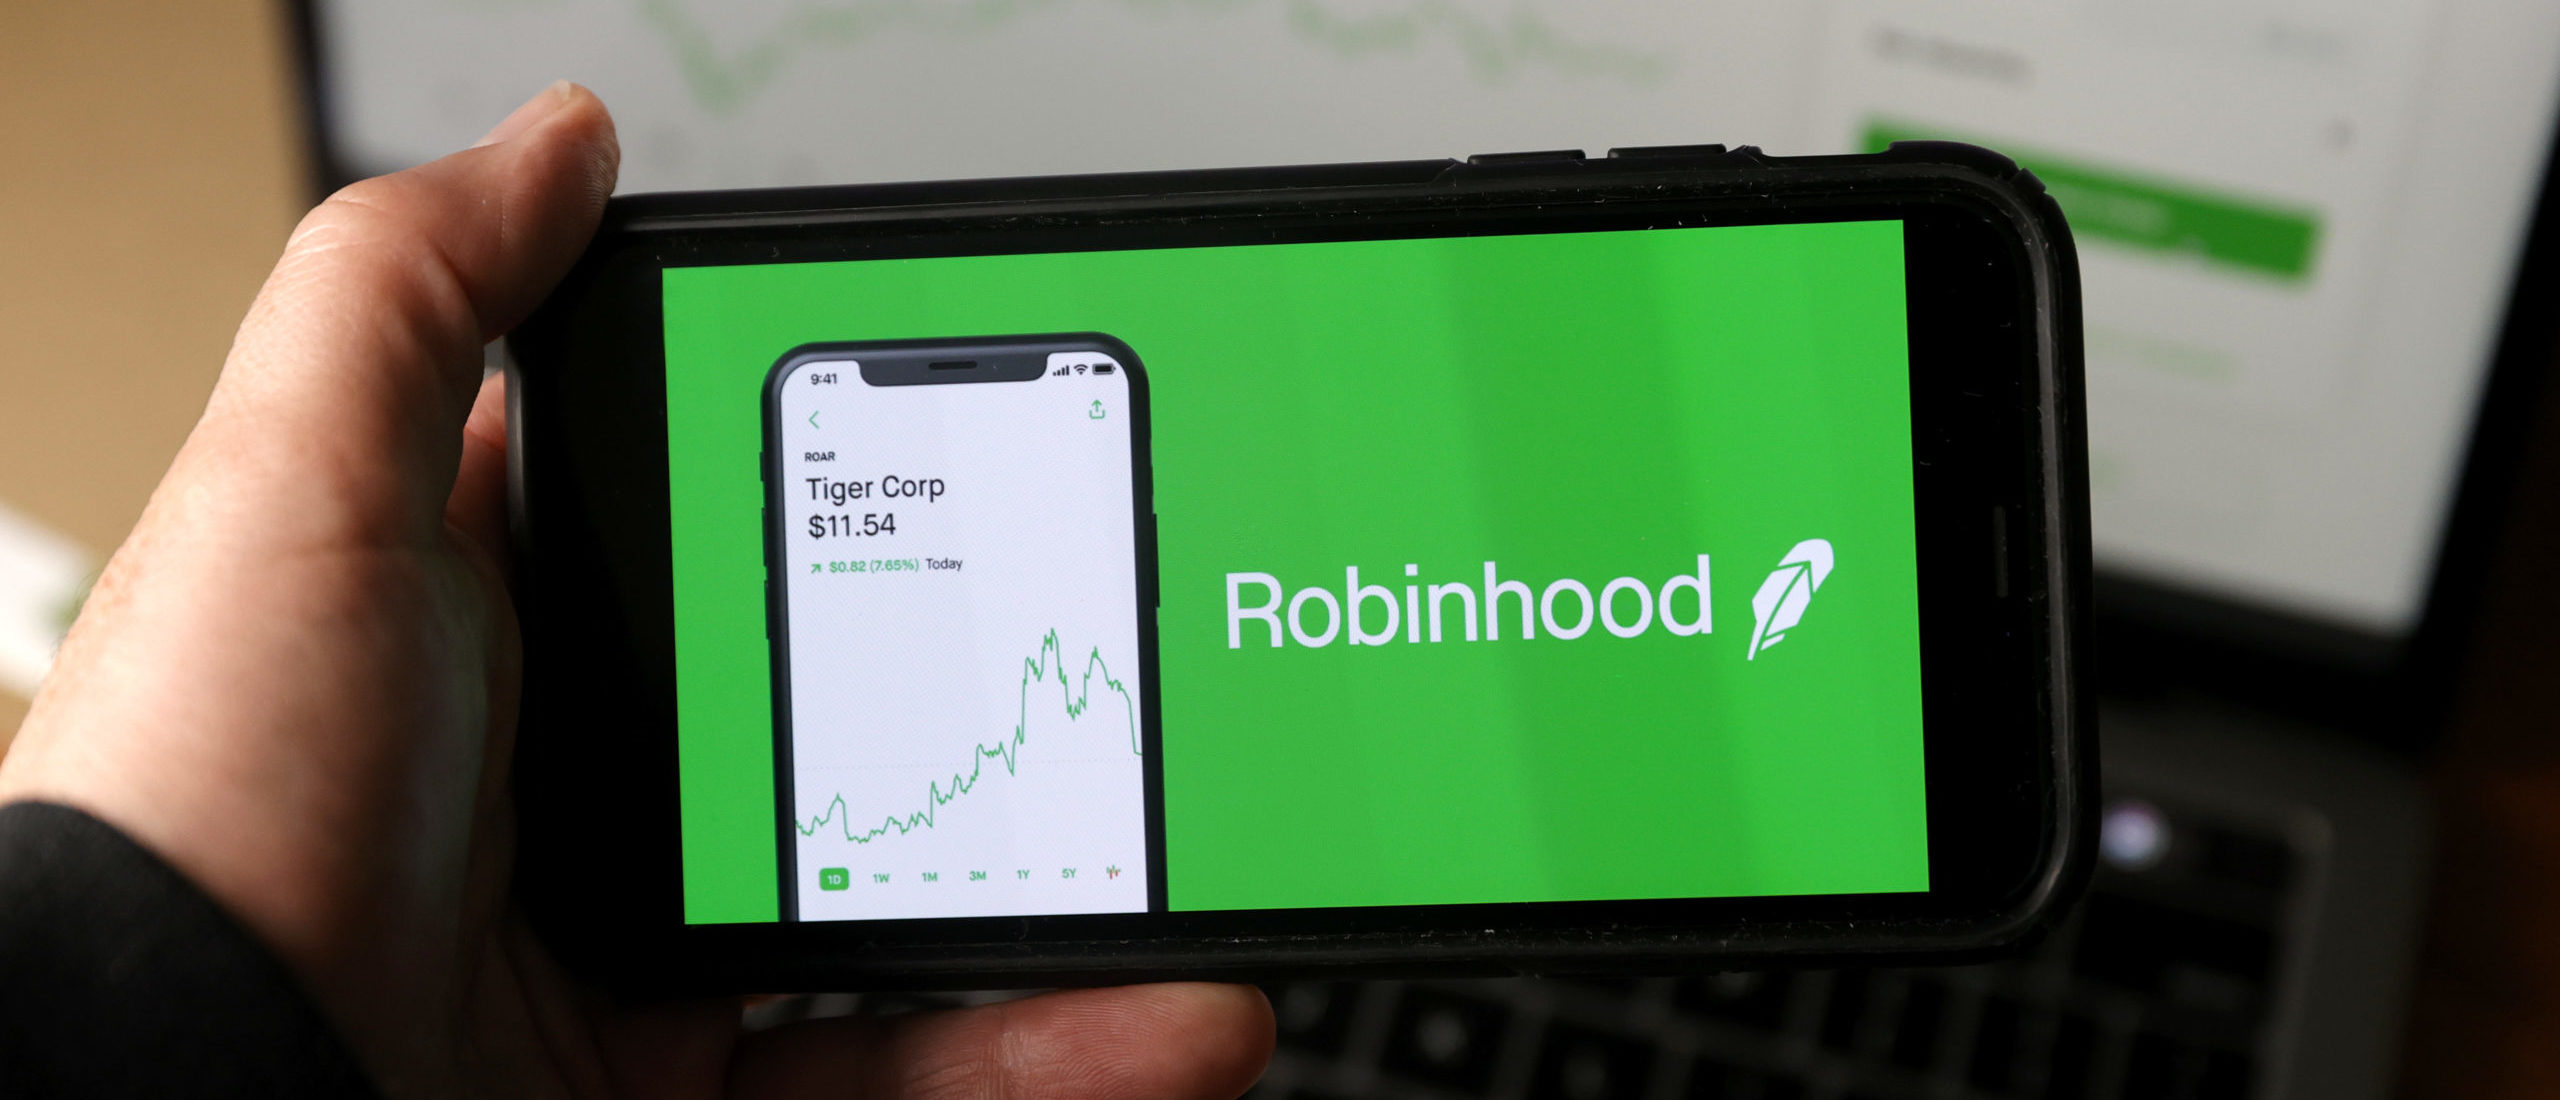 Class Action Lawsuit Filed Against Robinhood The Daily Caller